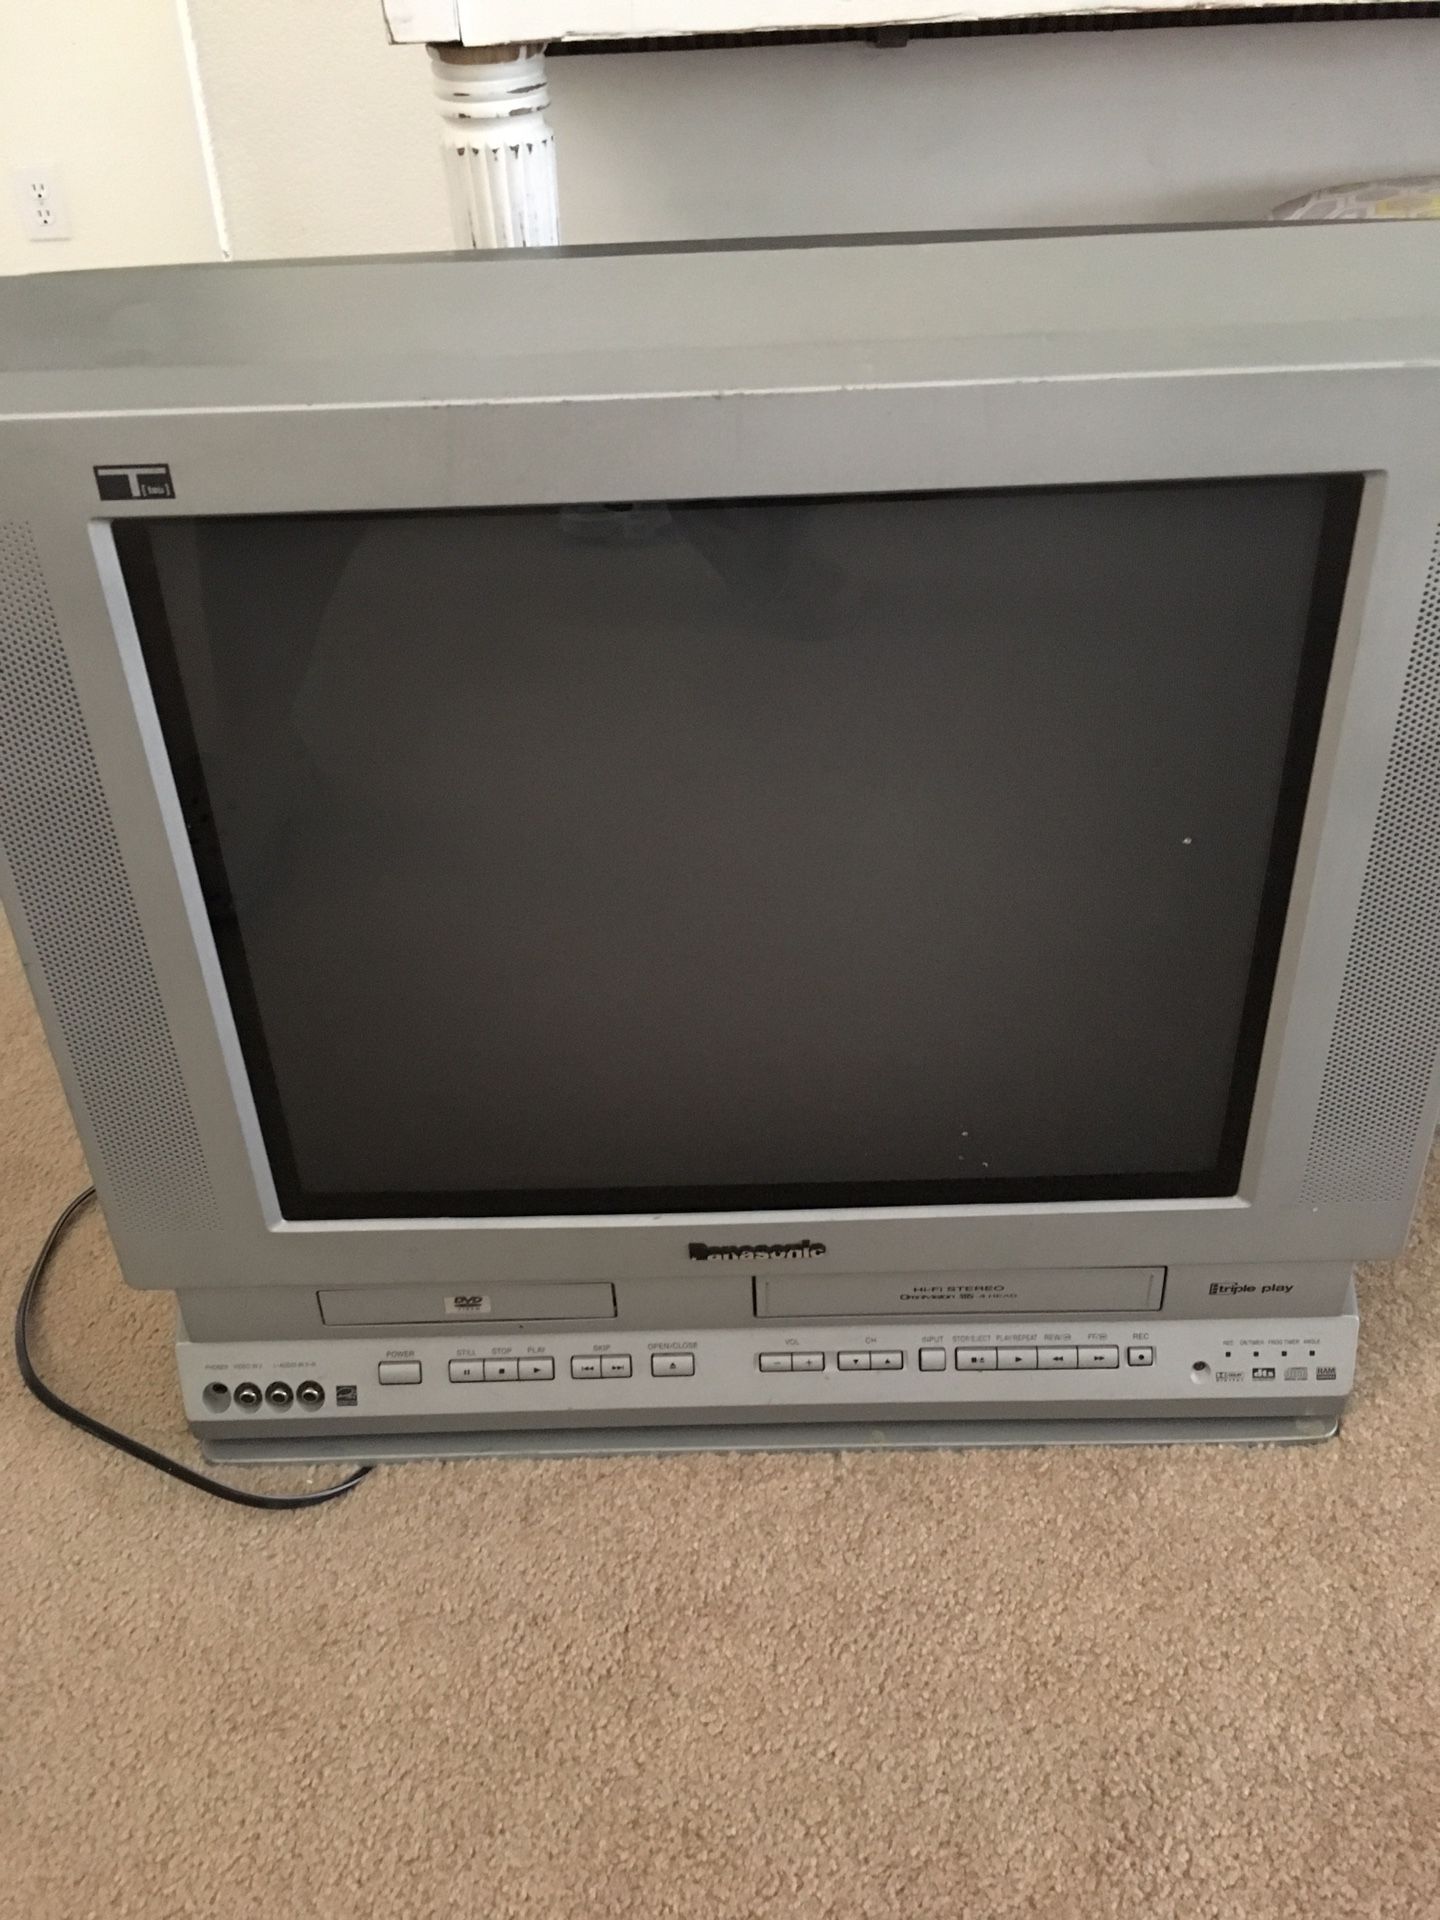 Tv with vcr and DVD player